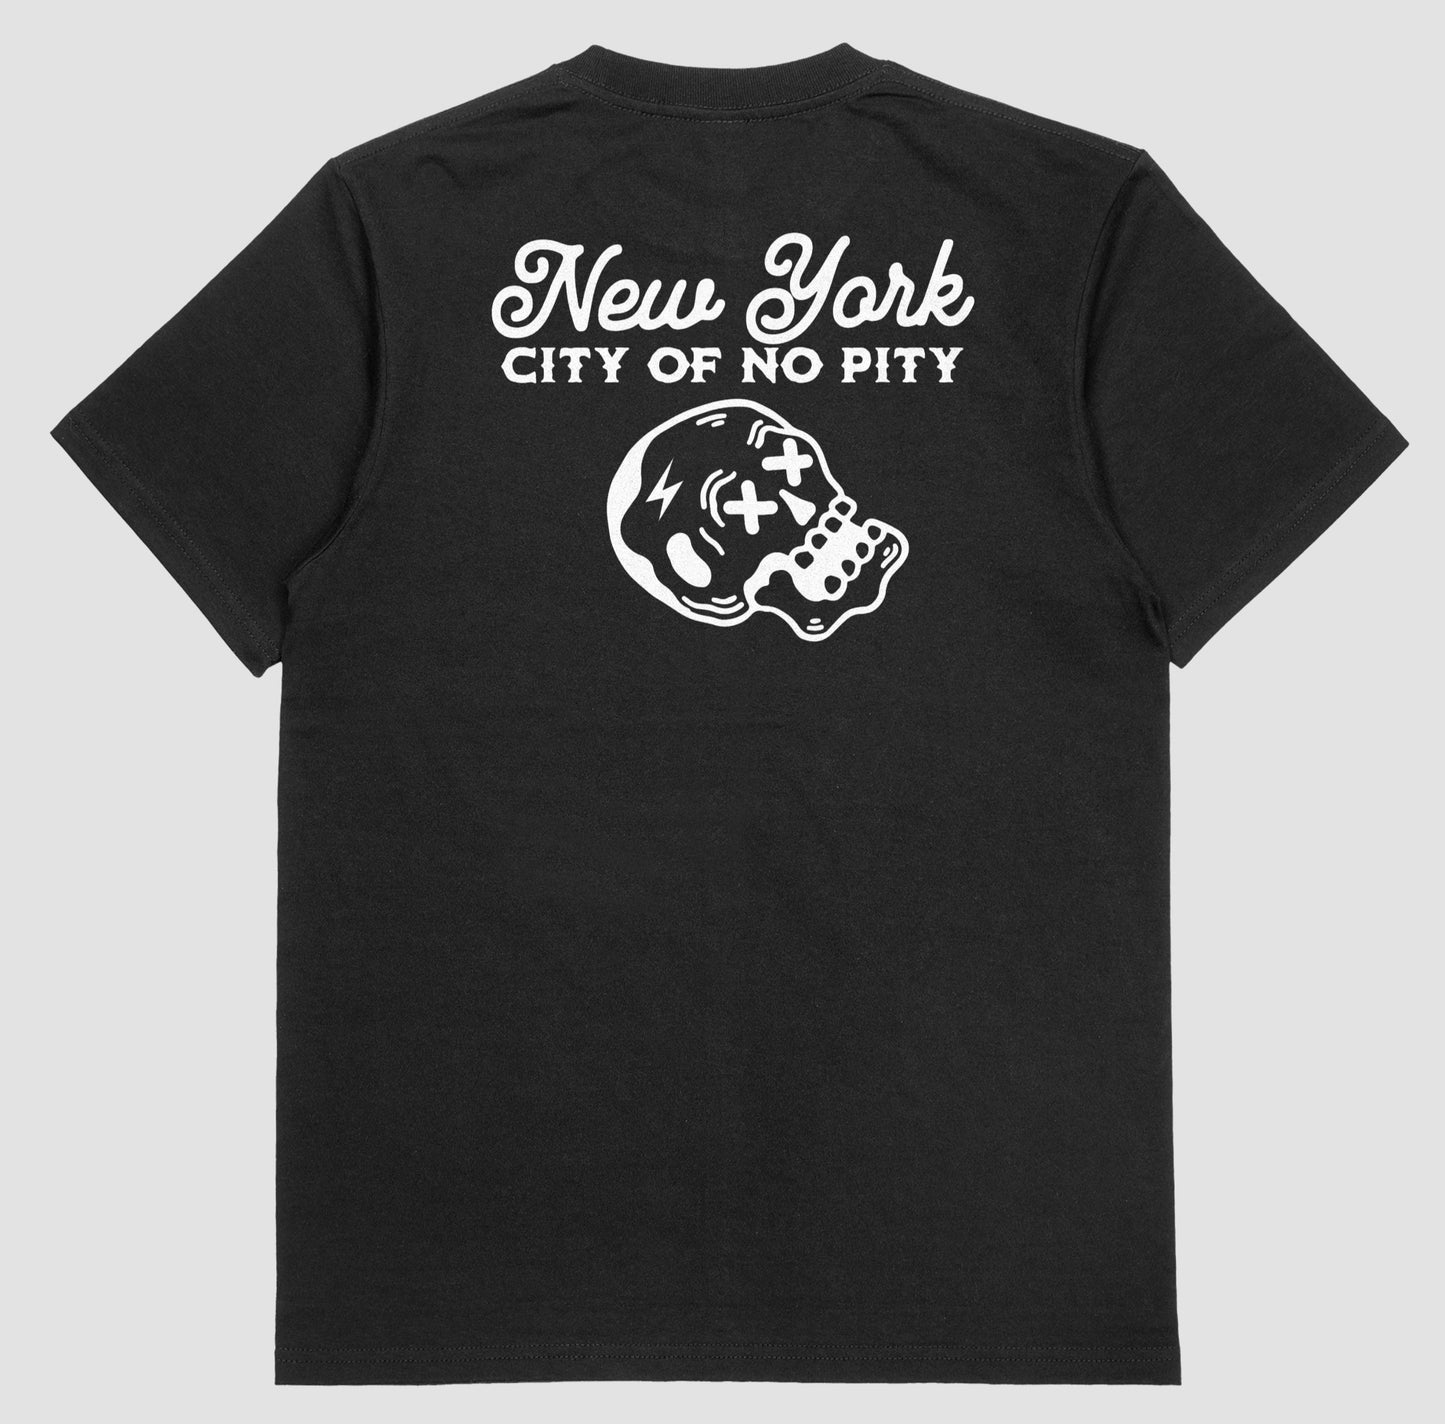 New York “City Of No Pity” Shirt or Hoodie